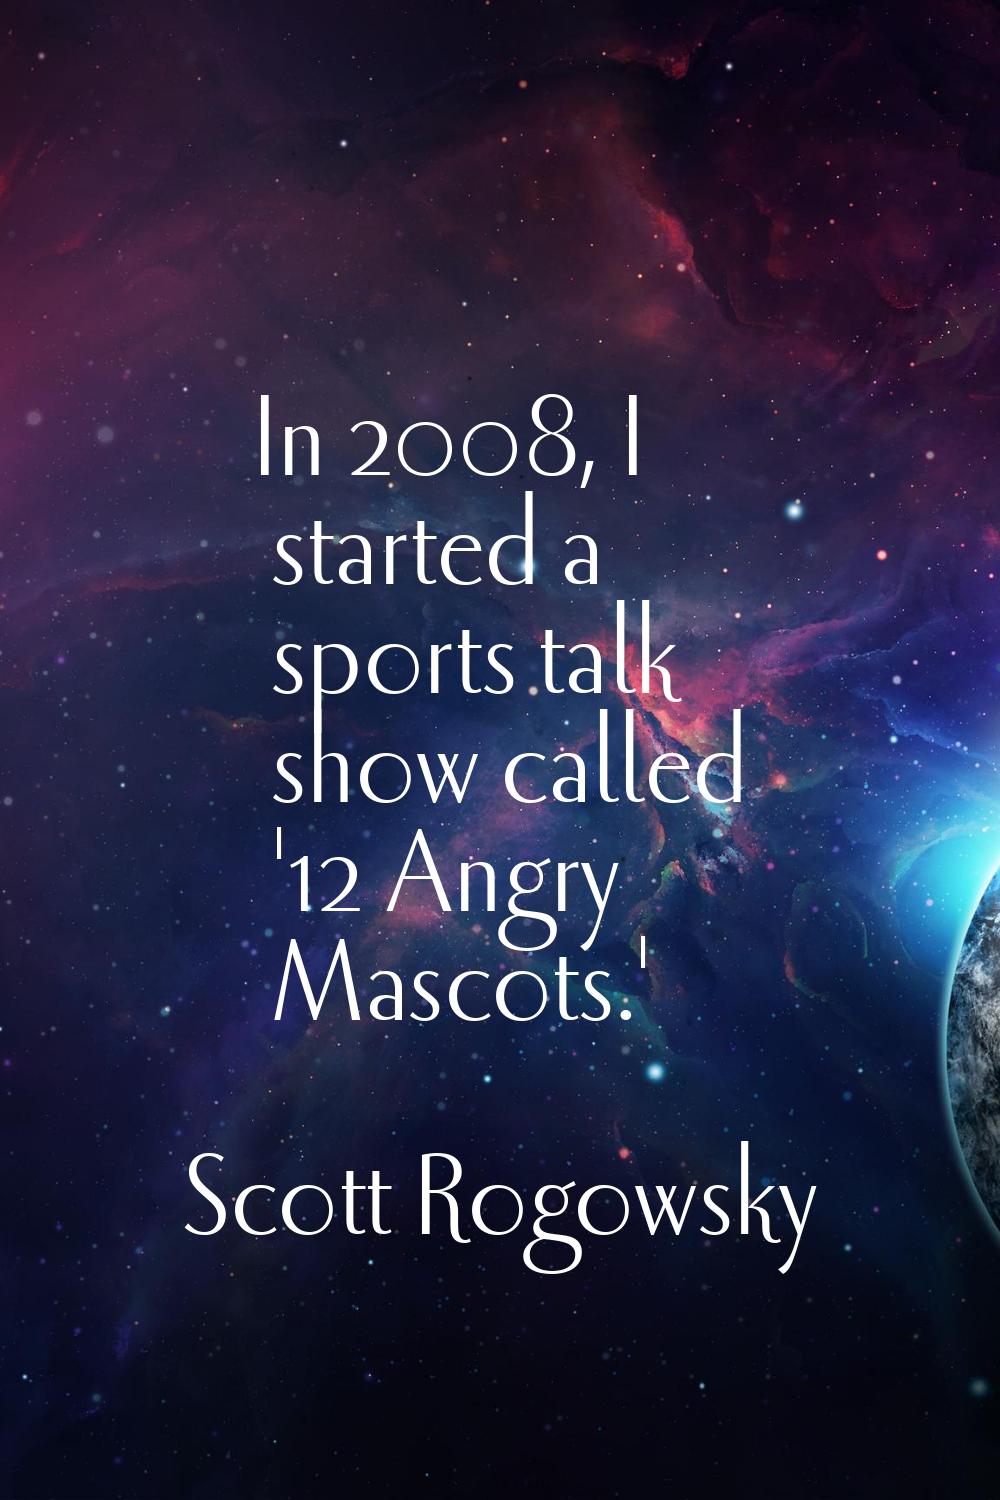 In 2008, I started a sports talk show called '12 Angry Mascots.'